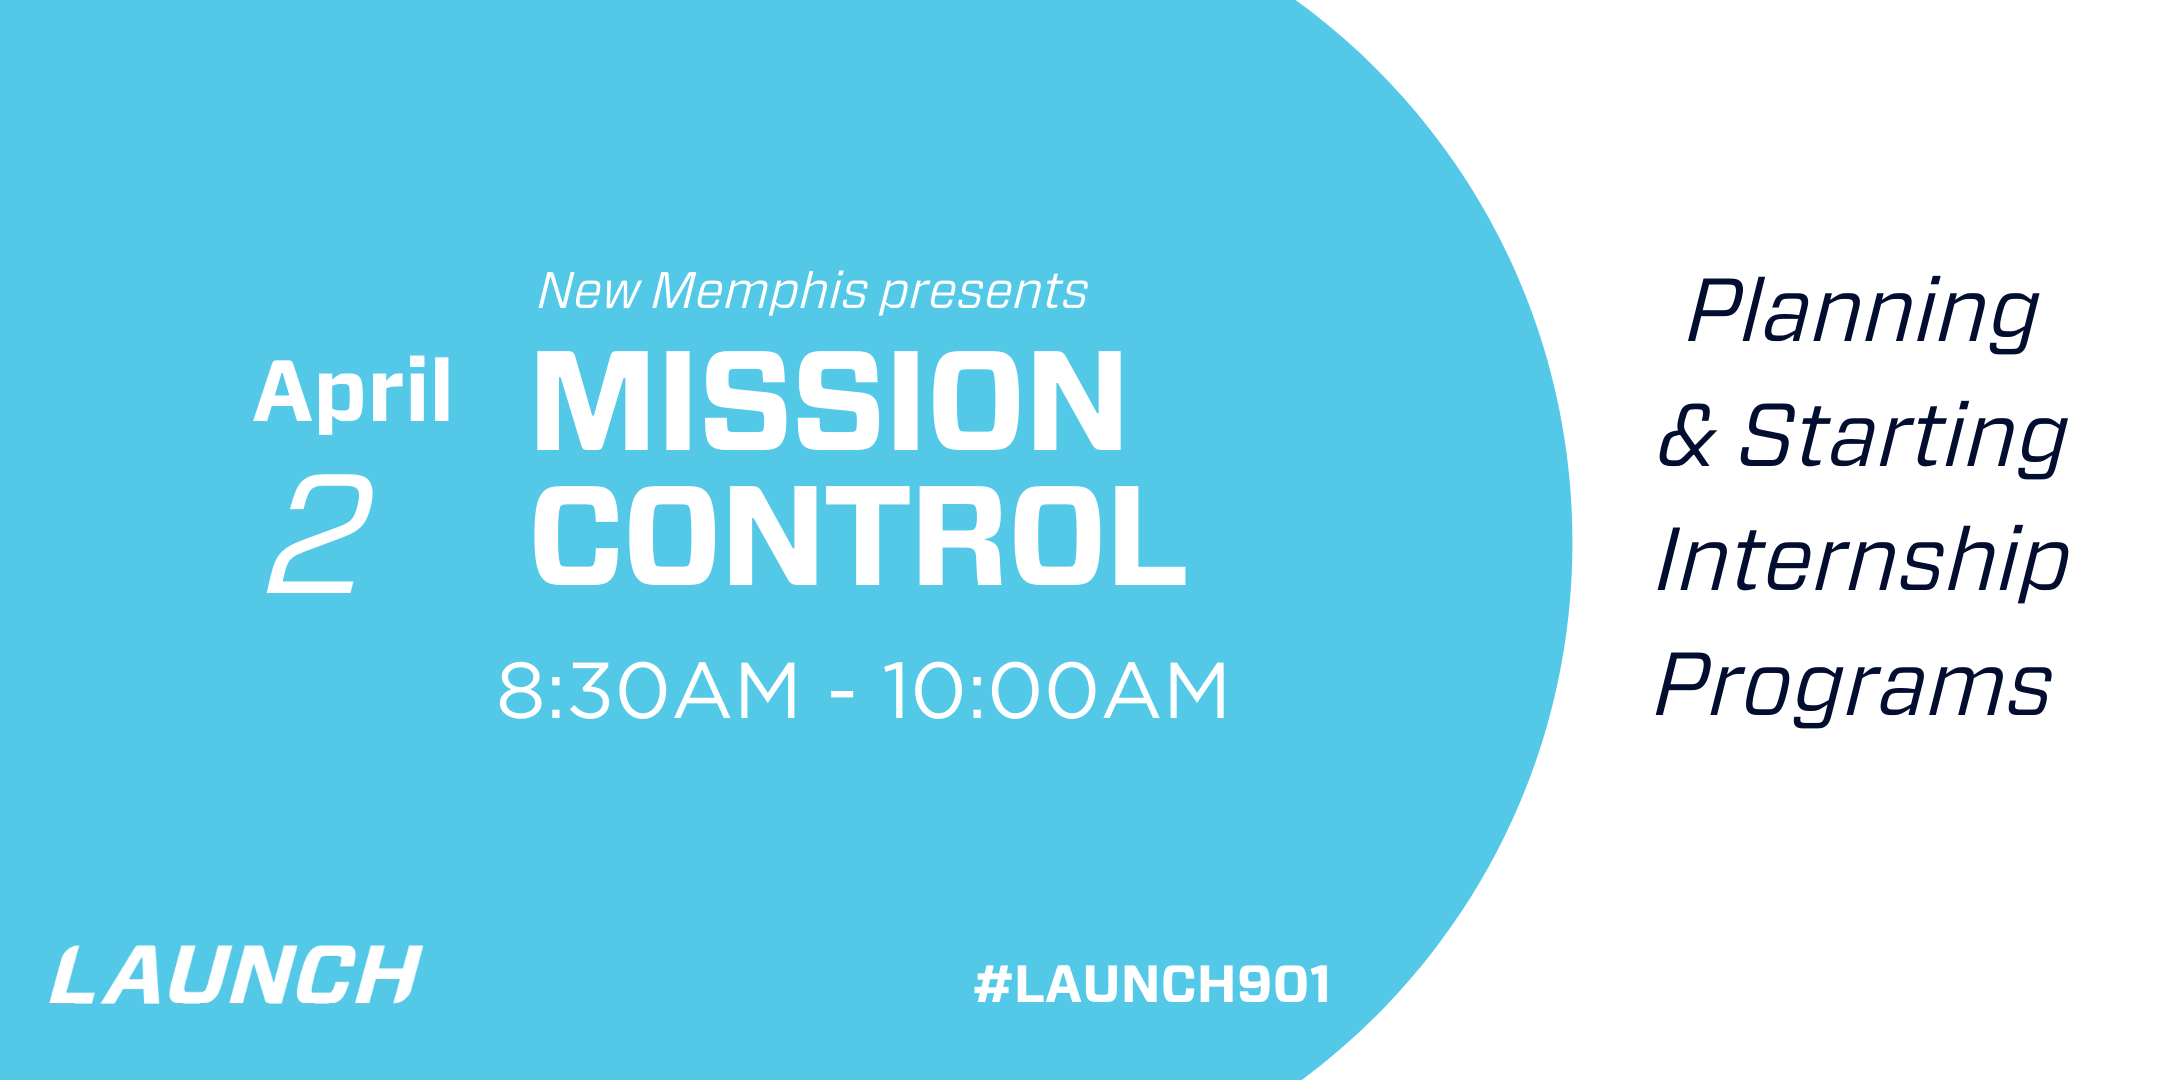  New Memphis - Mission Control: How to Plan and Start an Internship Program